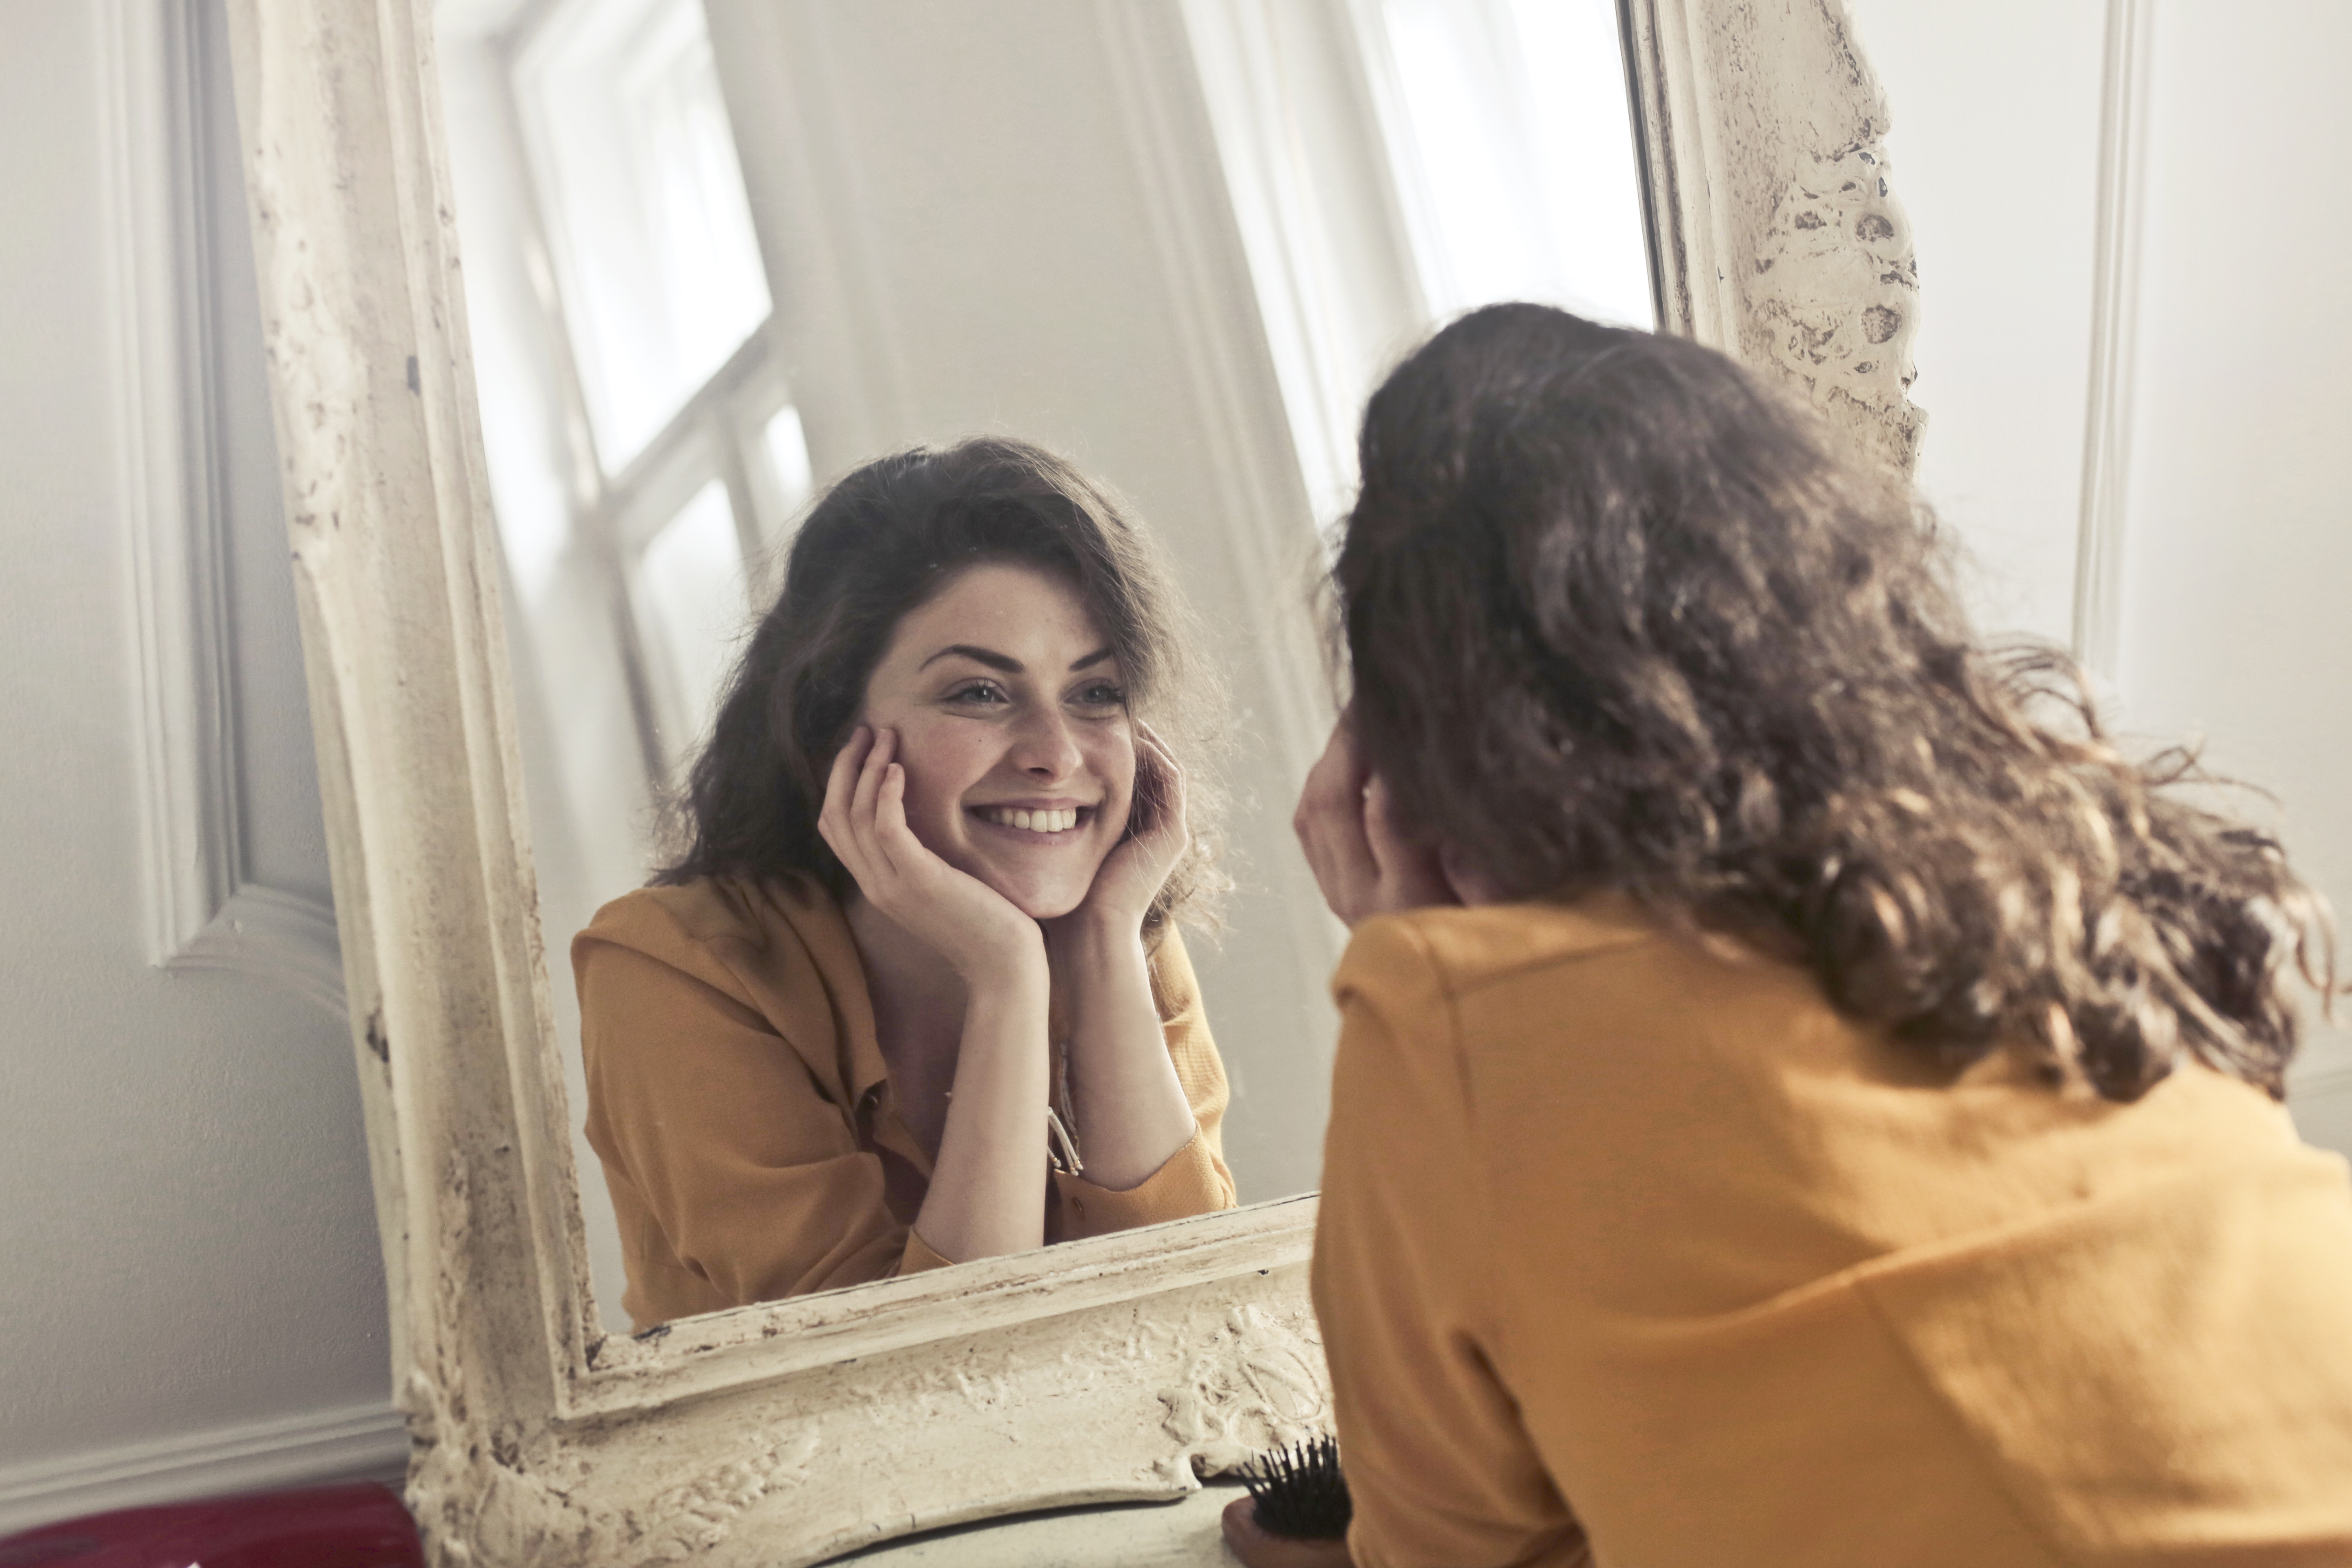 Woman looking at her smiling image on the mirror